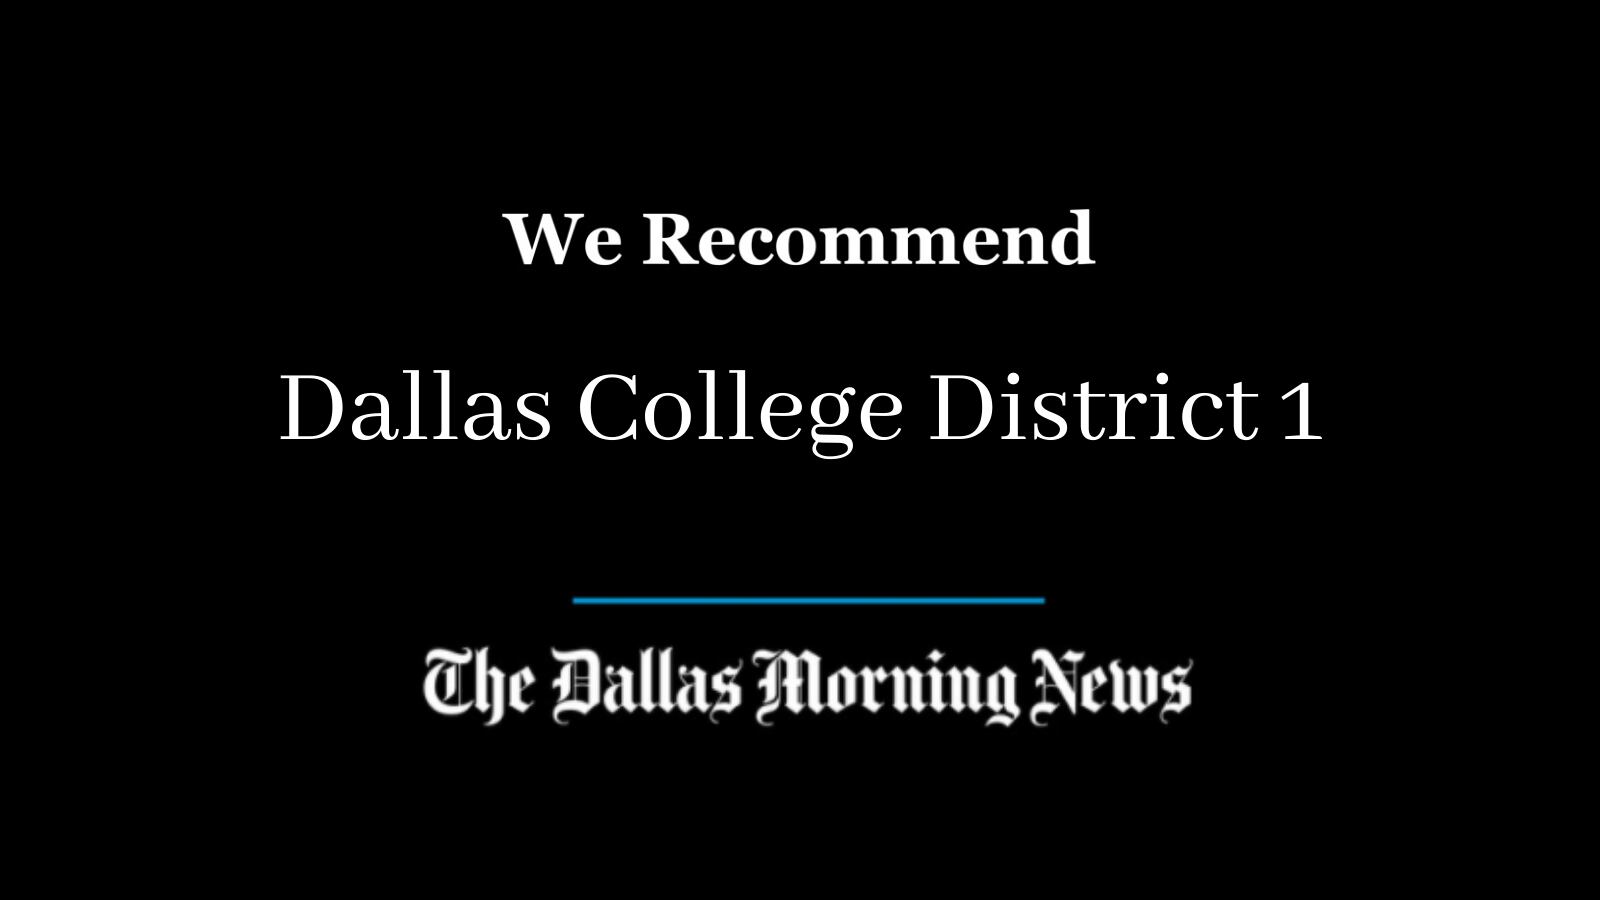 Dallas College' approved as new name for community college district